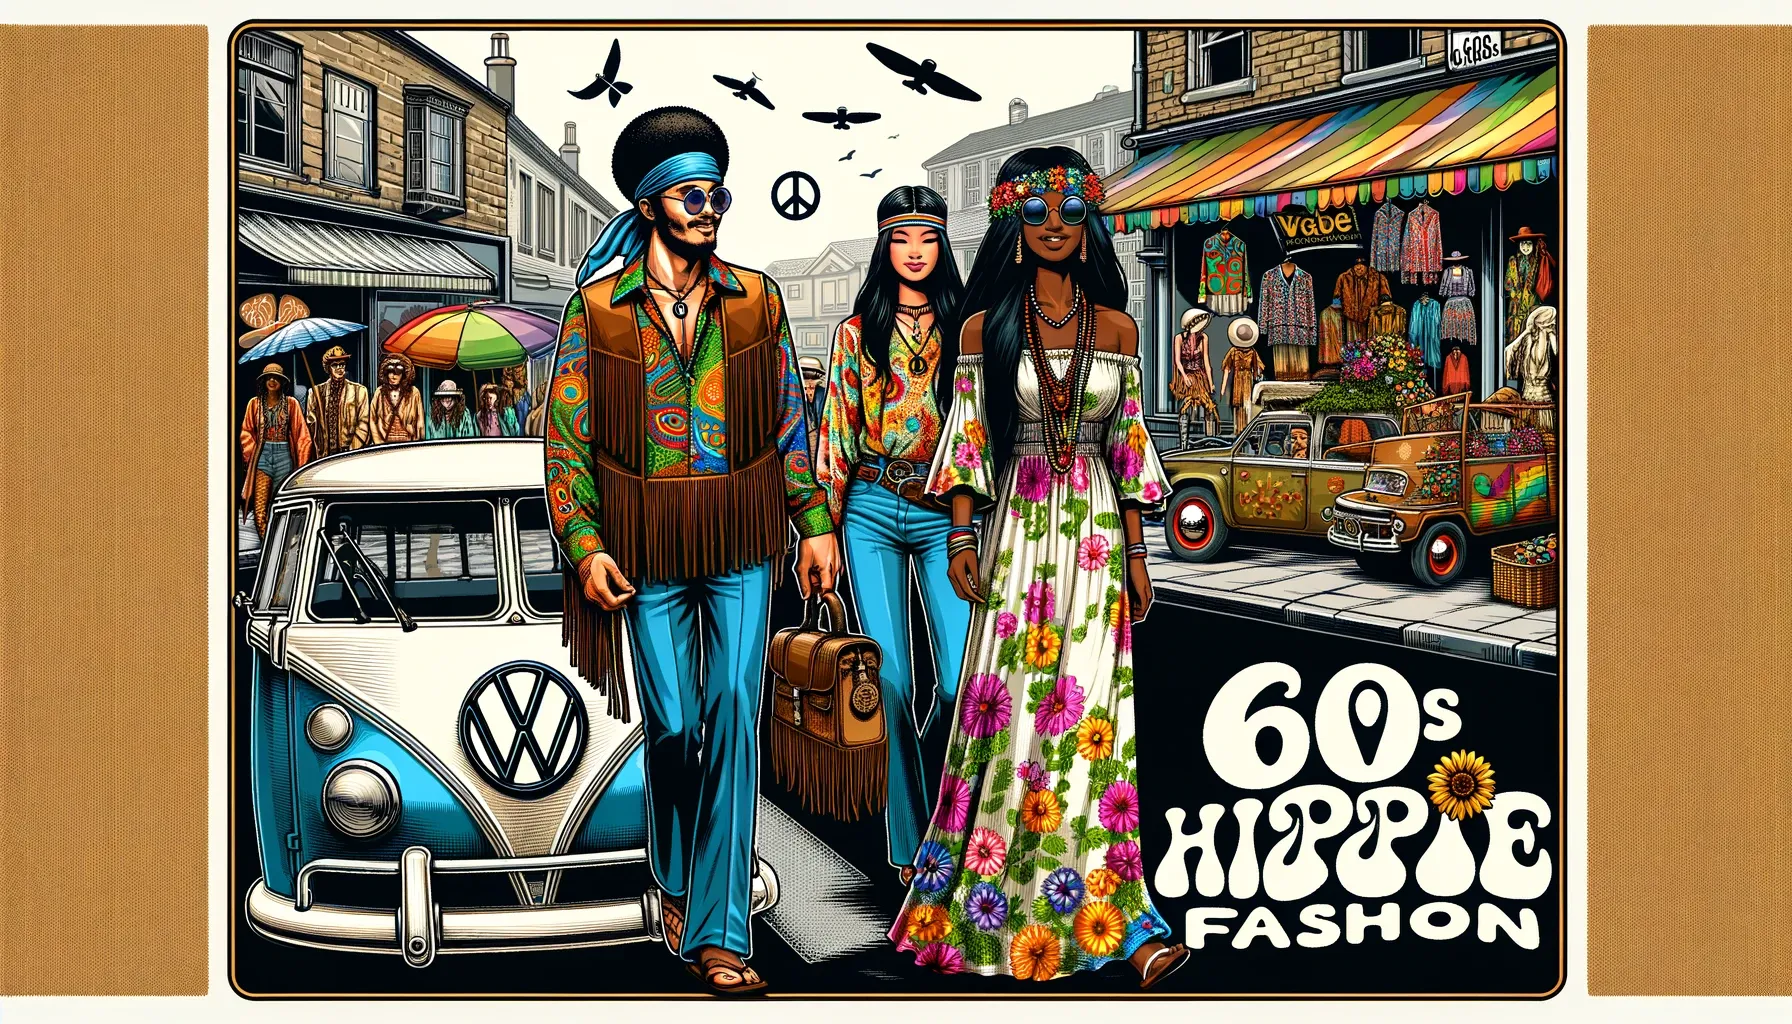 60s Hippie Fashion: Embracing the Ideals of Peace, Love, and Freedom